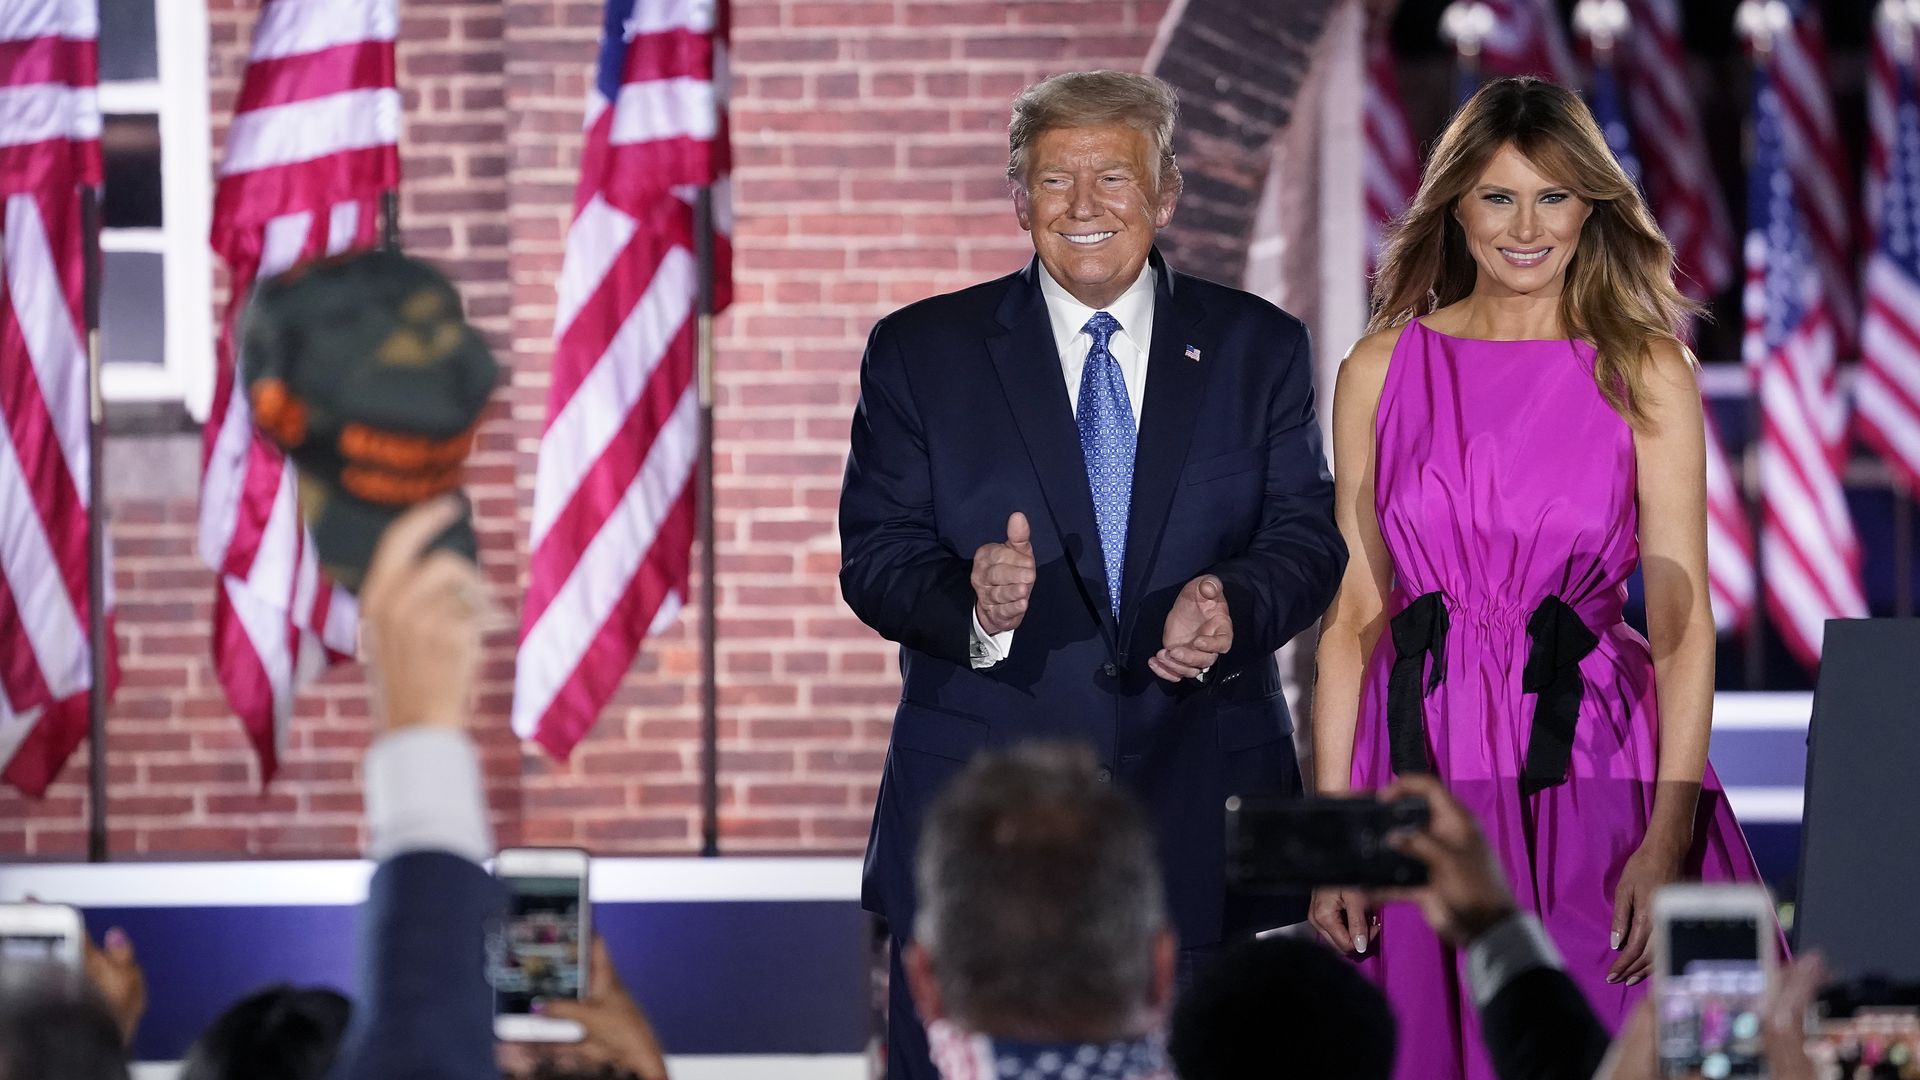 President Donald Trump and first lady Melania Trump on stage.